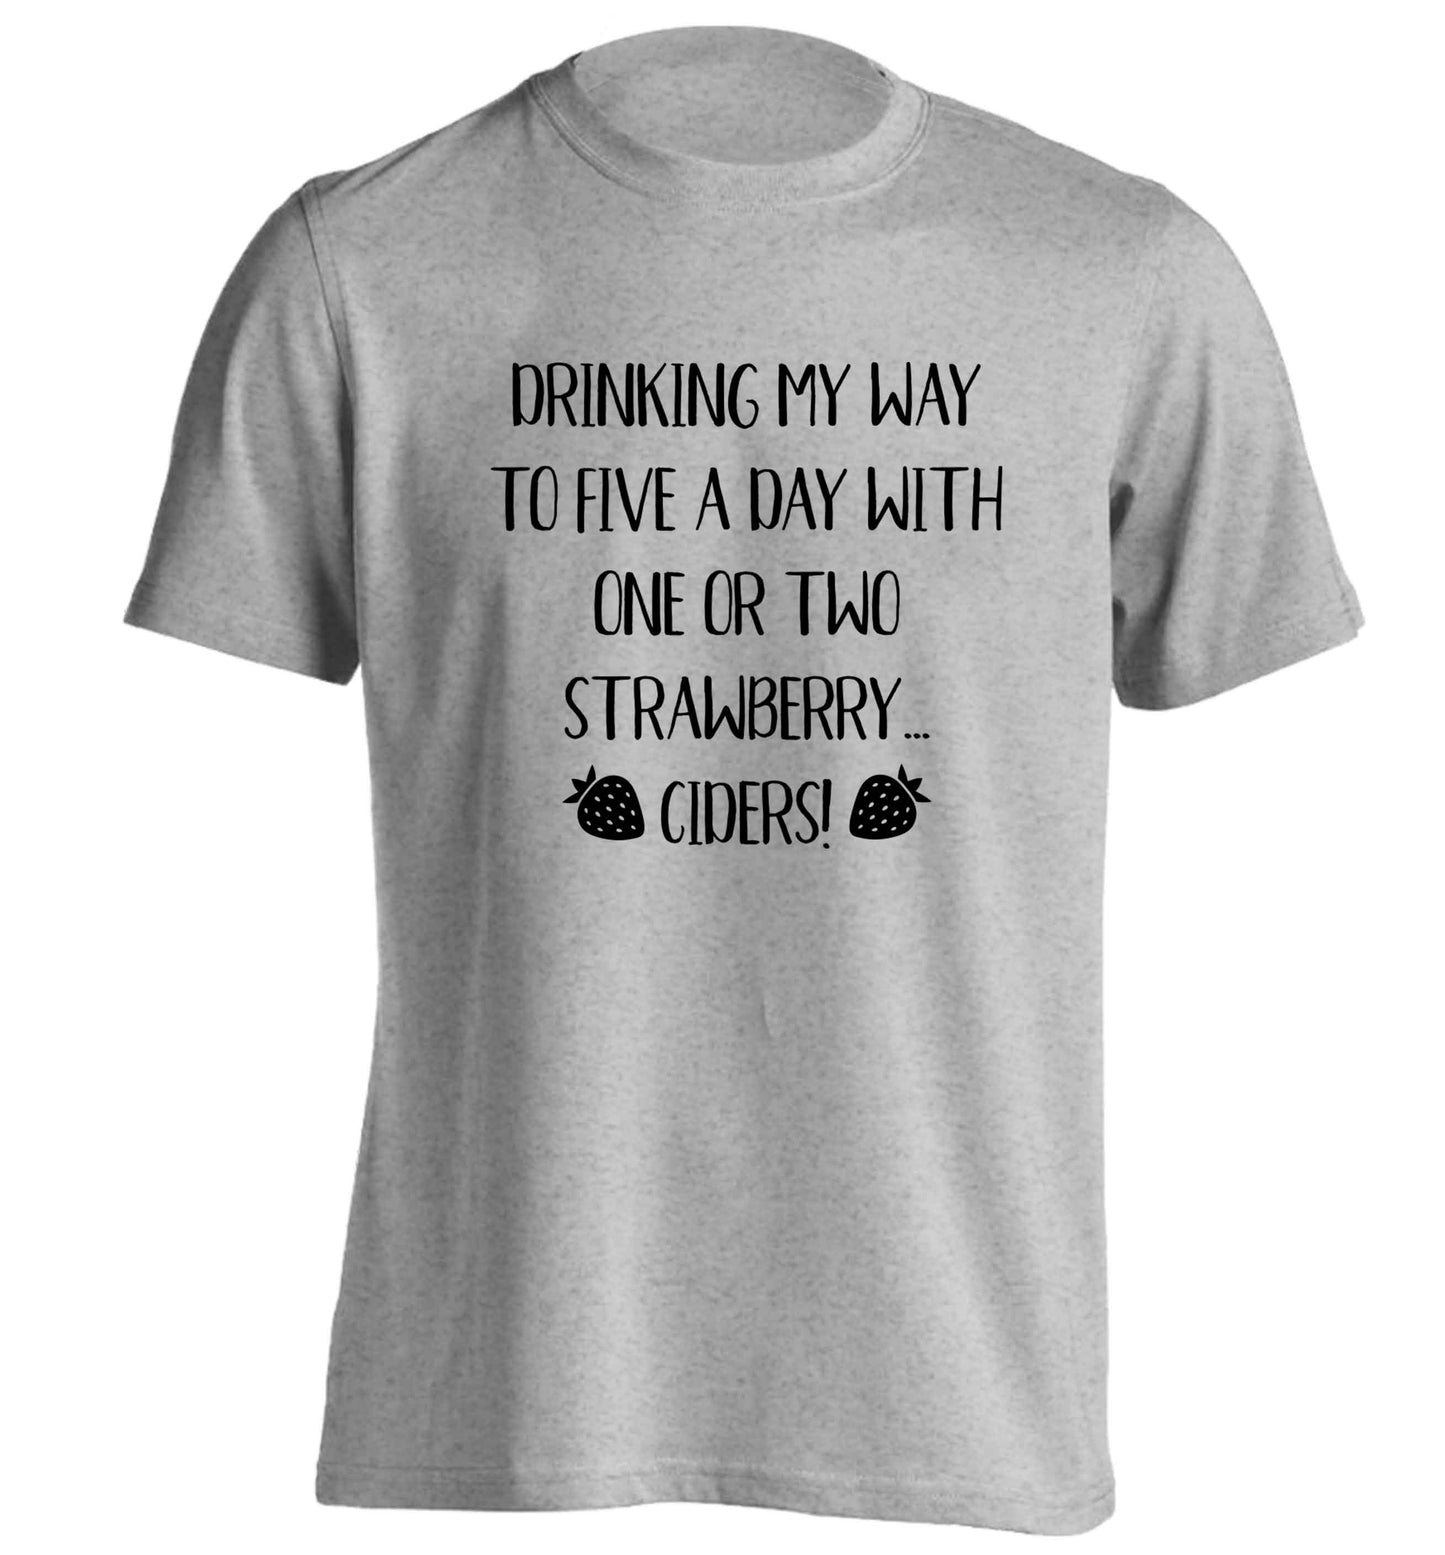 Drinking my way to five a day with one or two strawberry ciders adults unisex grey Tshirt 2XL